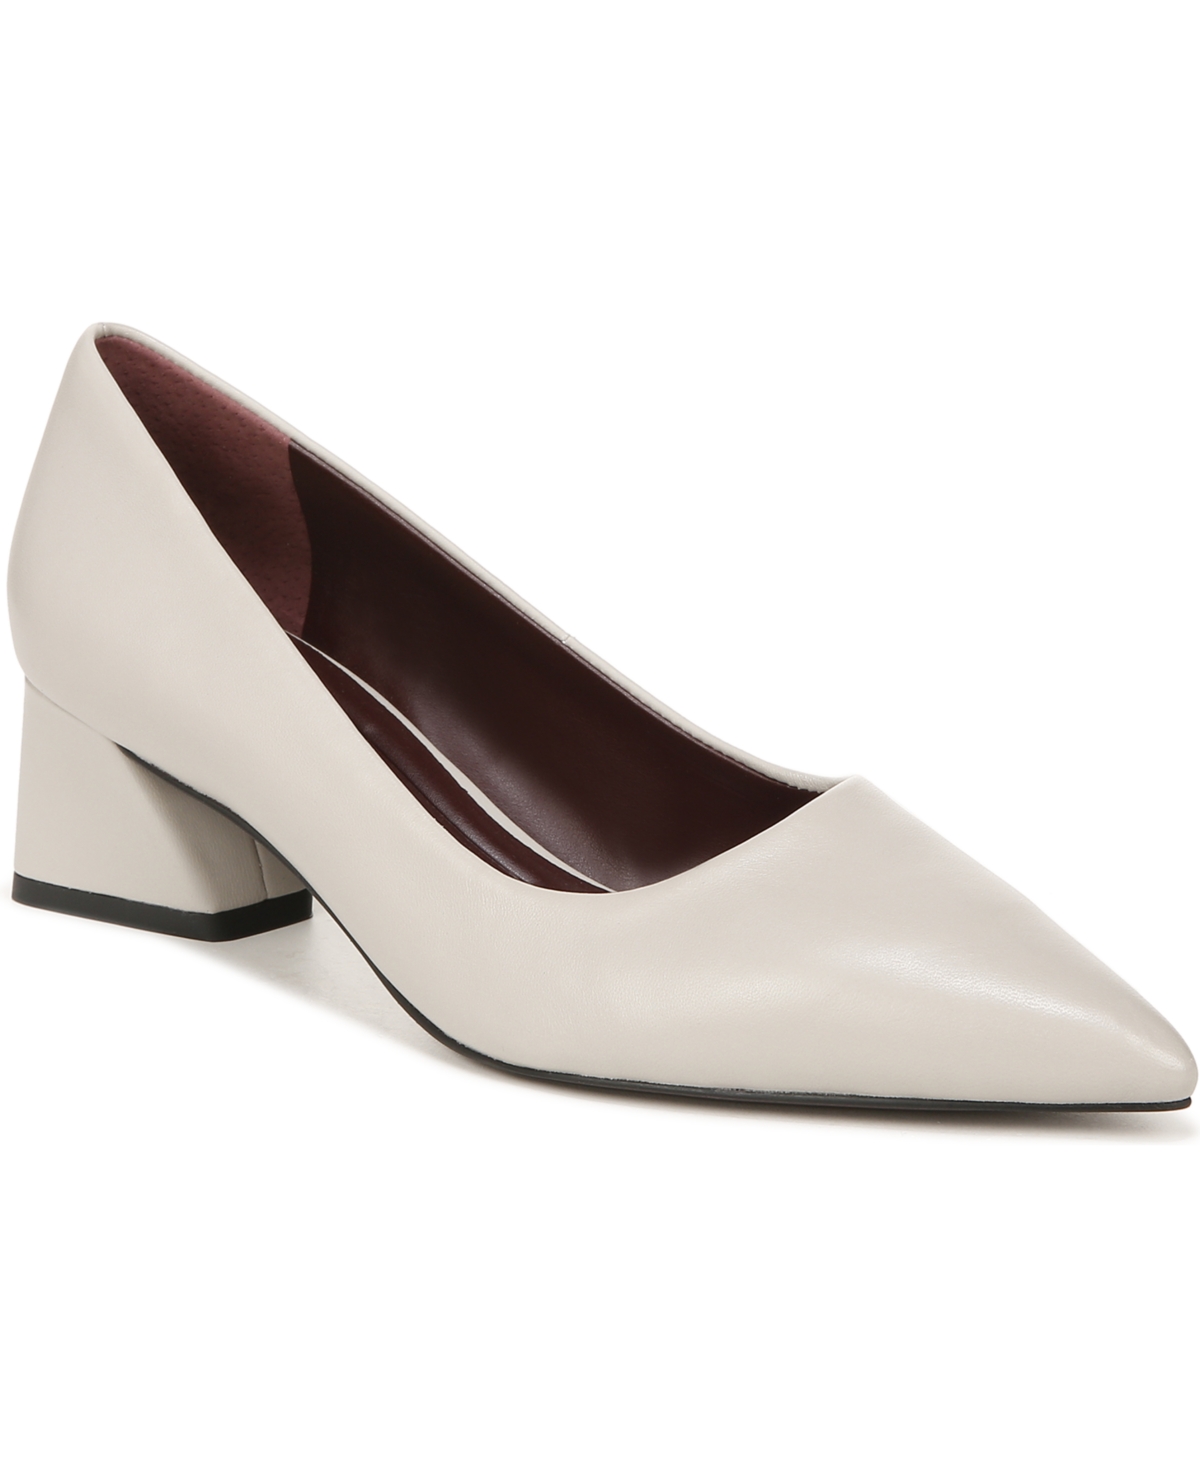 Racer-Pump Pointed Toe Block Heel Pumps - Stone Grey Leather